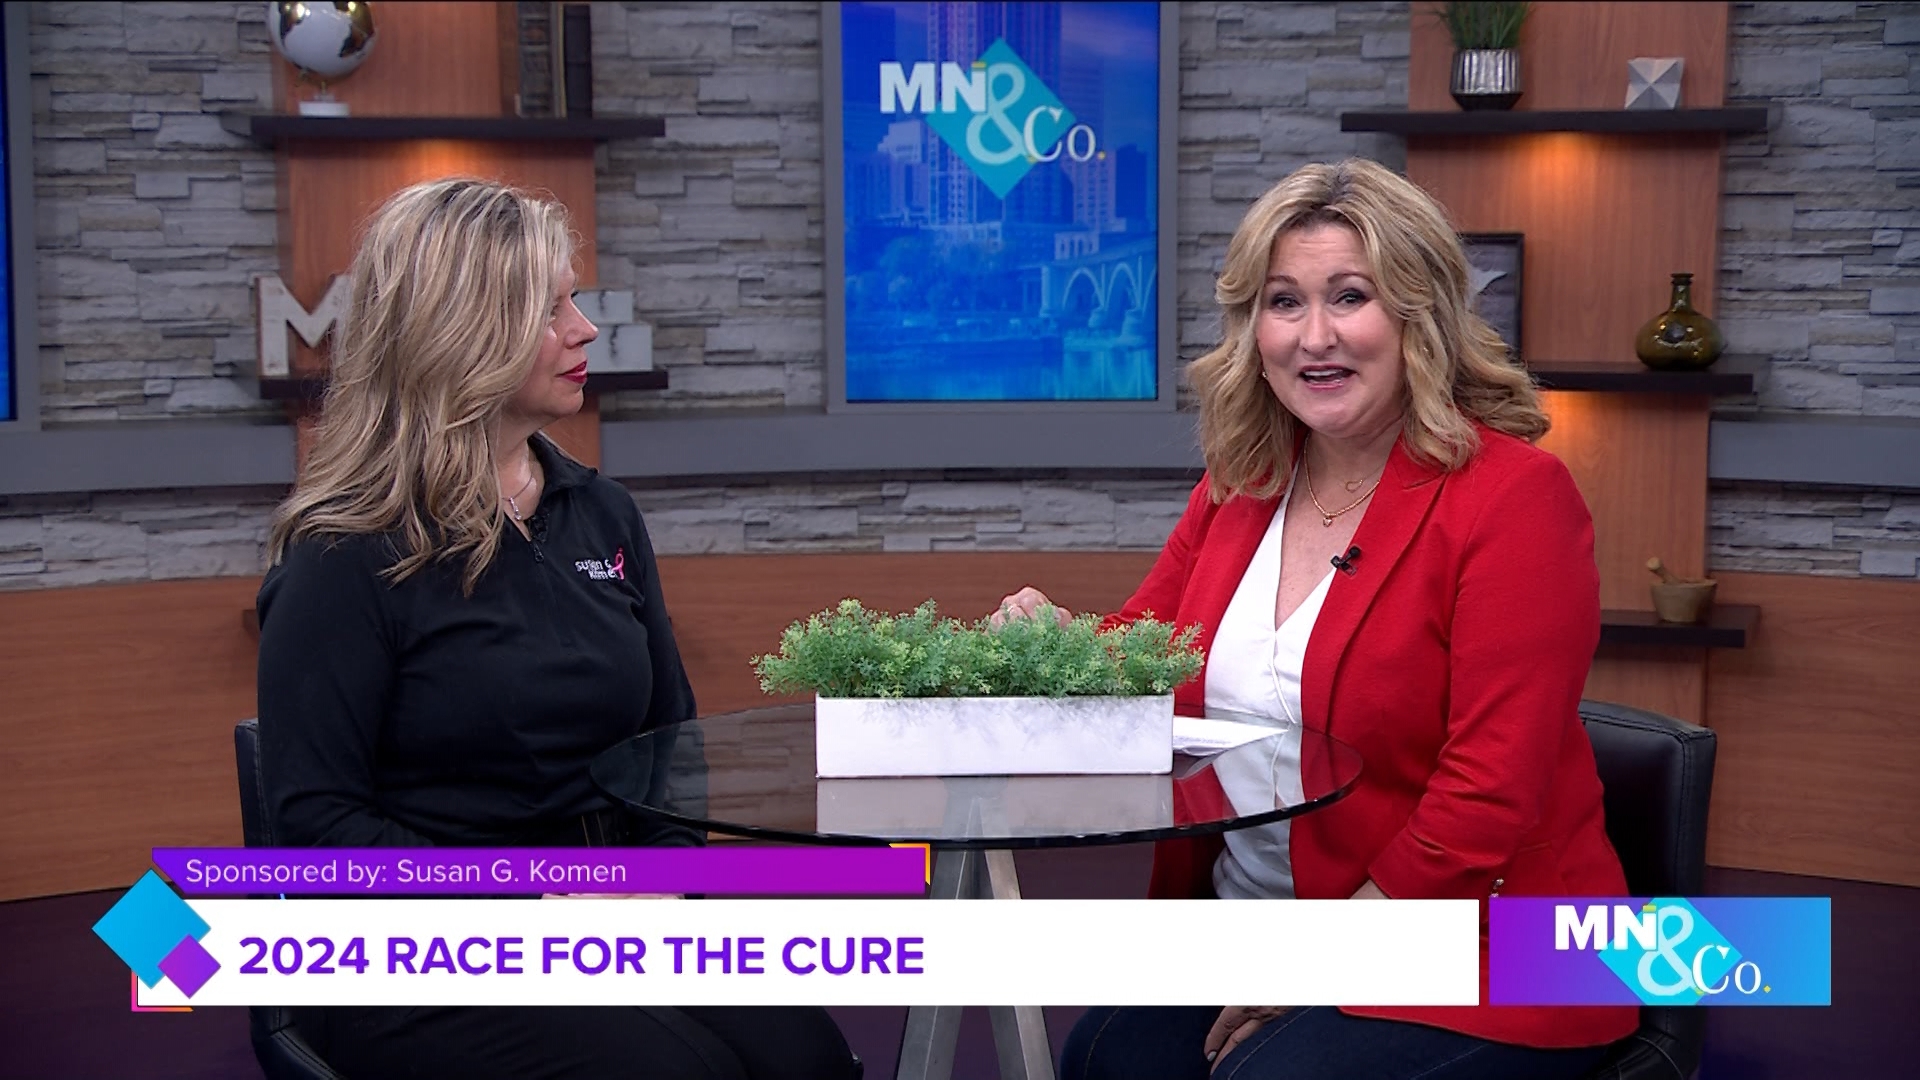 Alicia Gordon Macalus from Susan G. Komen joins Minnesota and Company to talk about this year’s Race for the Cure event.